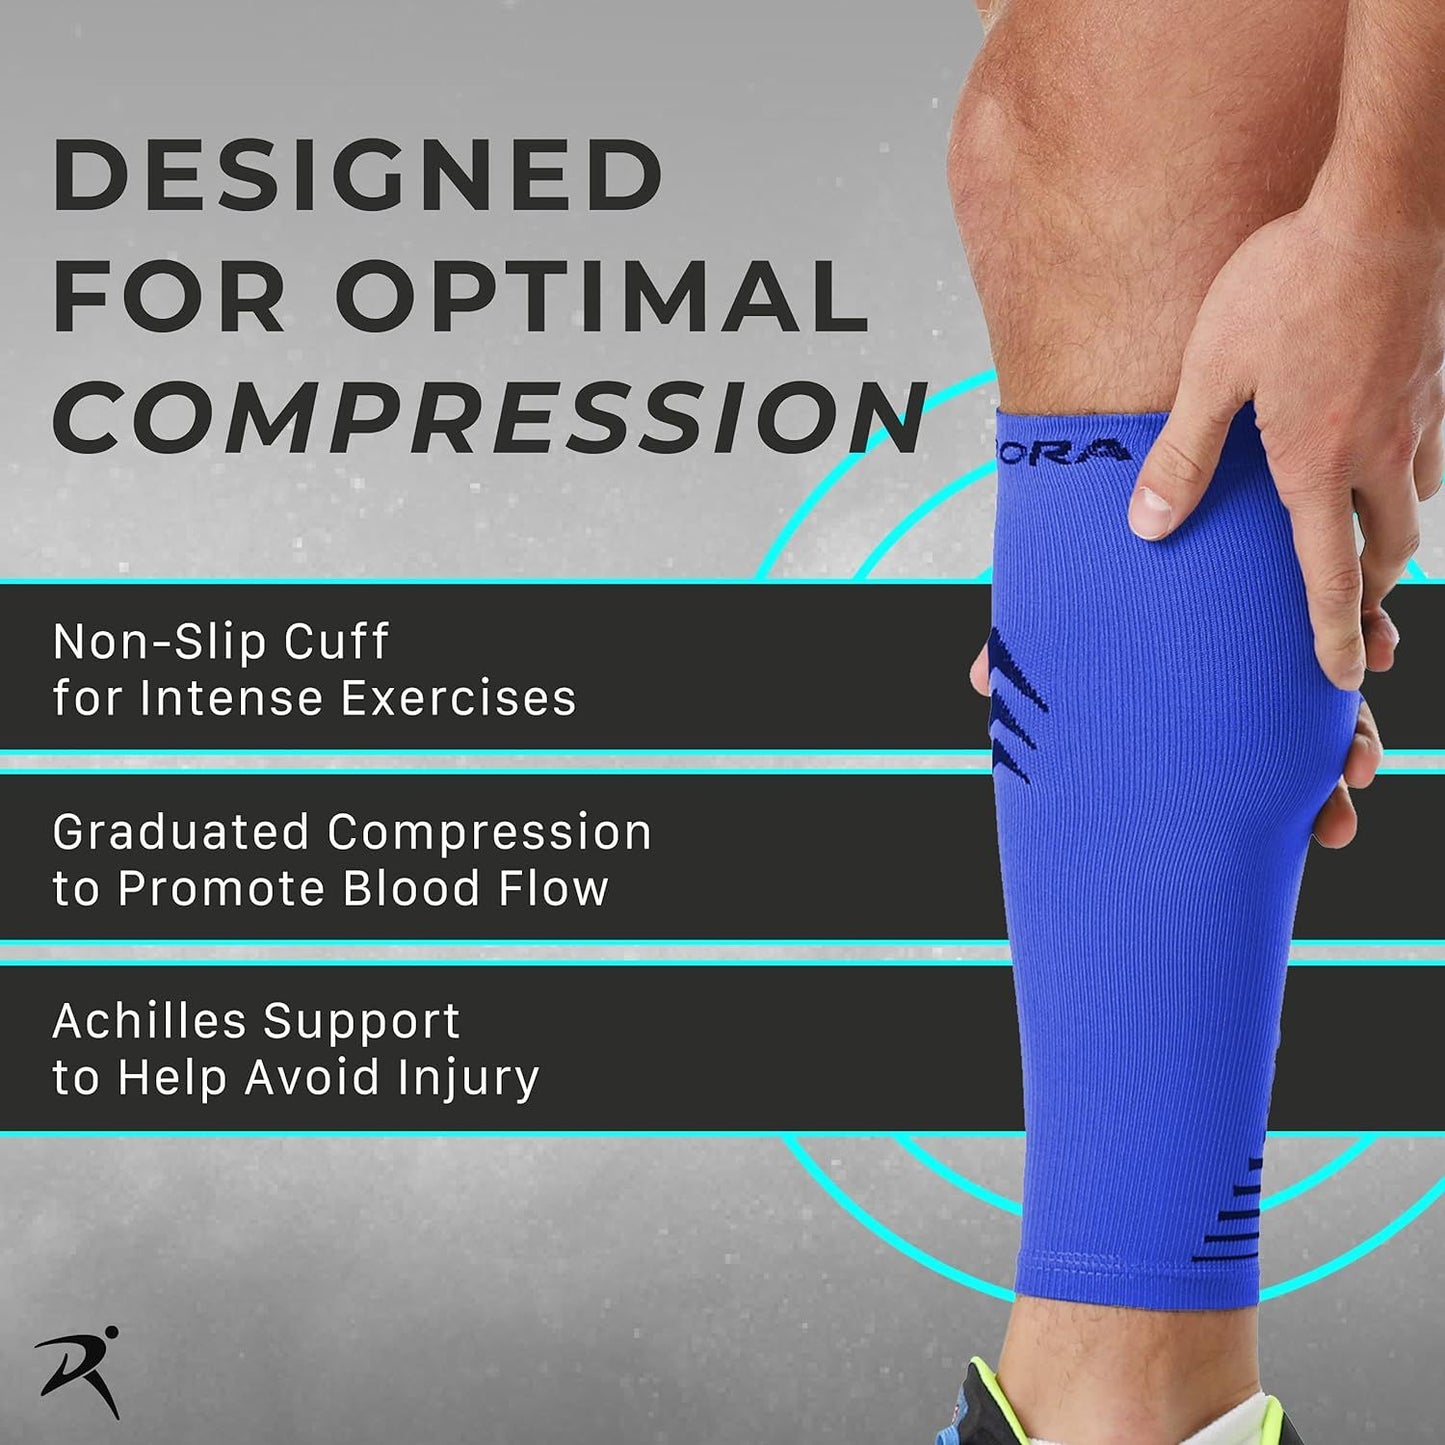 New RYMORA-1 Pair Unisex Calf Compression Sleeves-New In Package-One Size